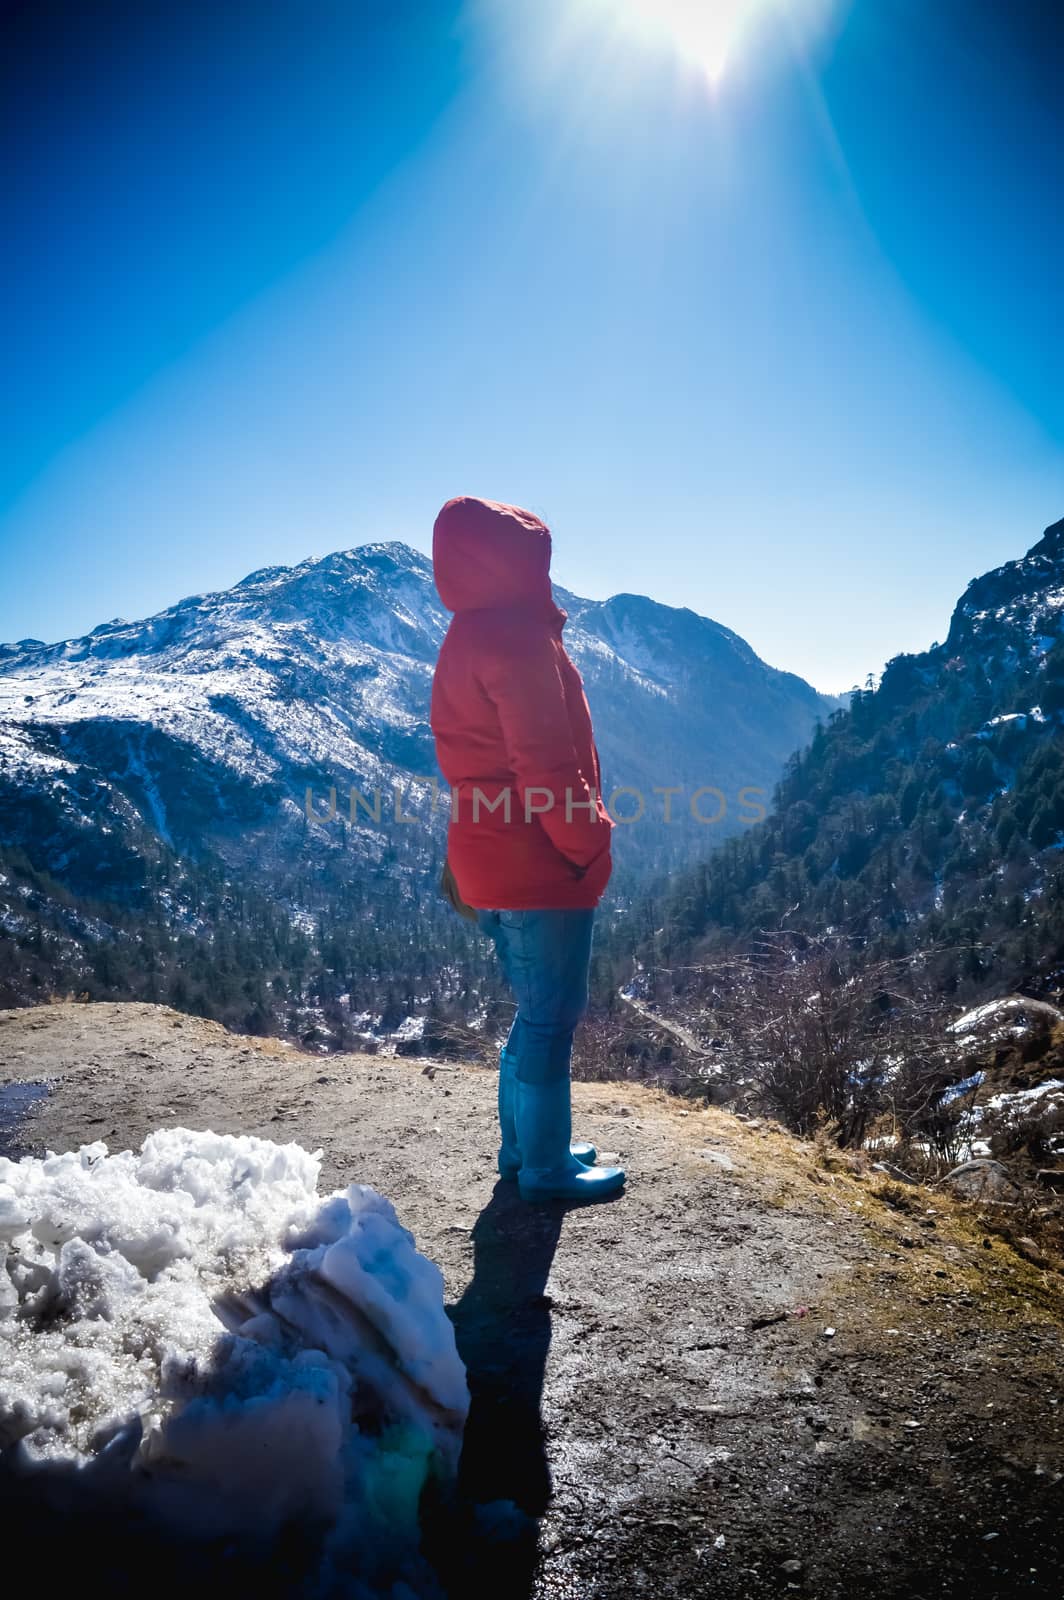 A woman in winter warm clothing standing on top of the rock of a snowcapped rocky mountain peak. Rear view. Deep Snow and Blizzard all around. Human face to face with beauty in nature concept.